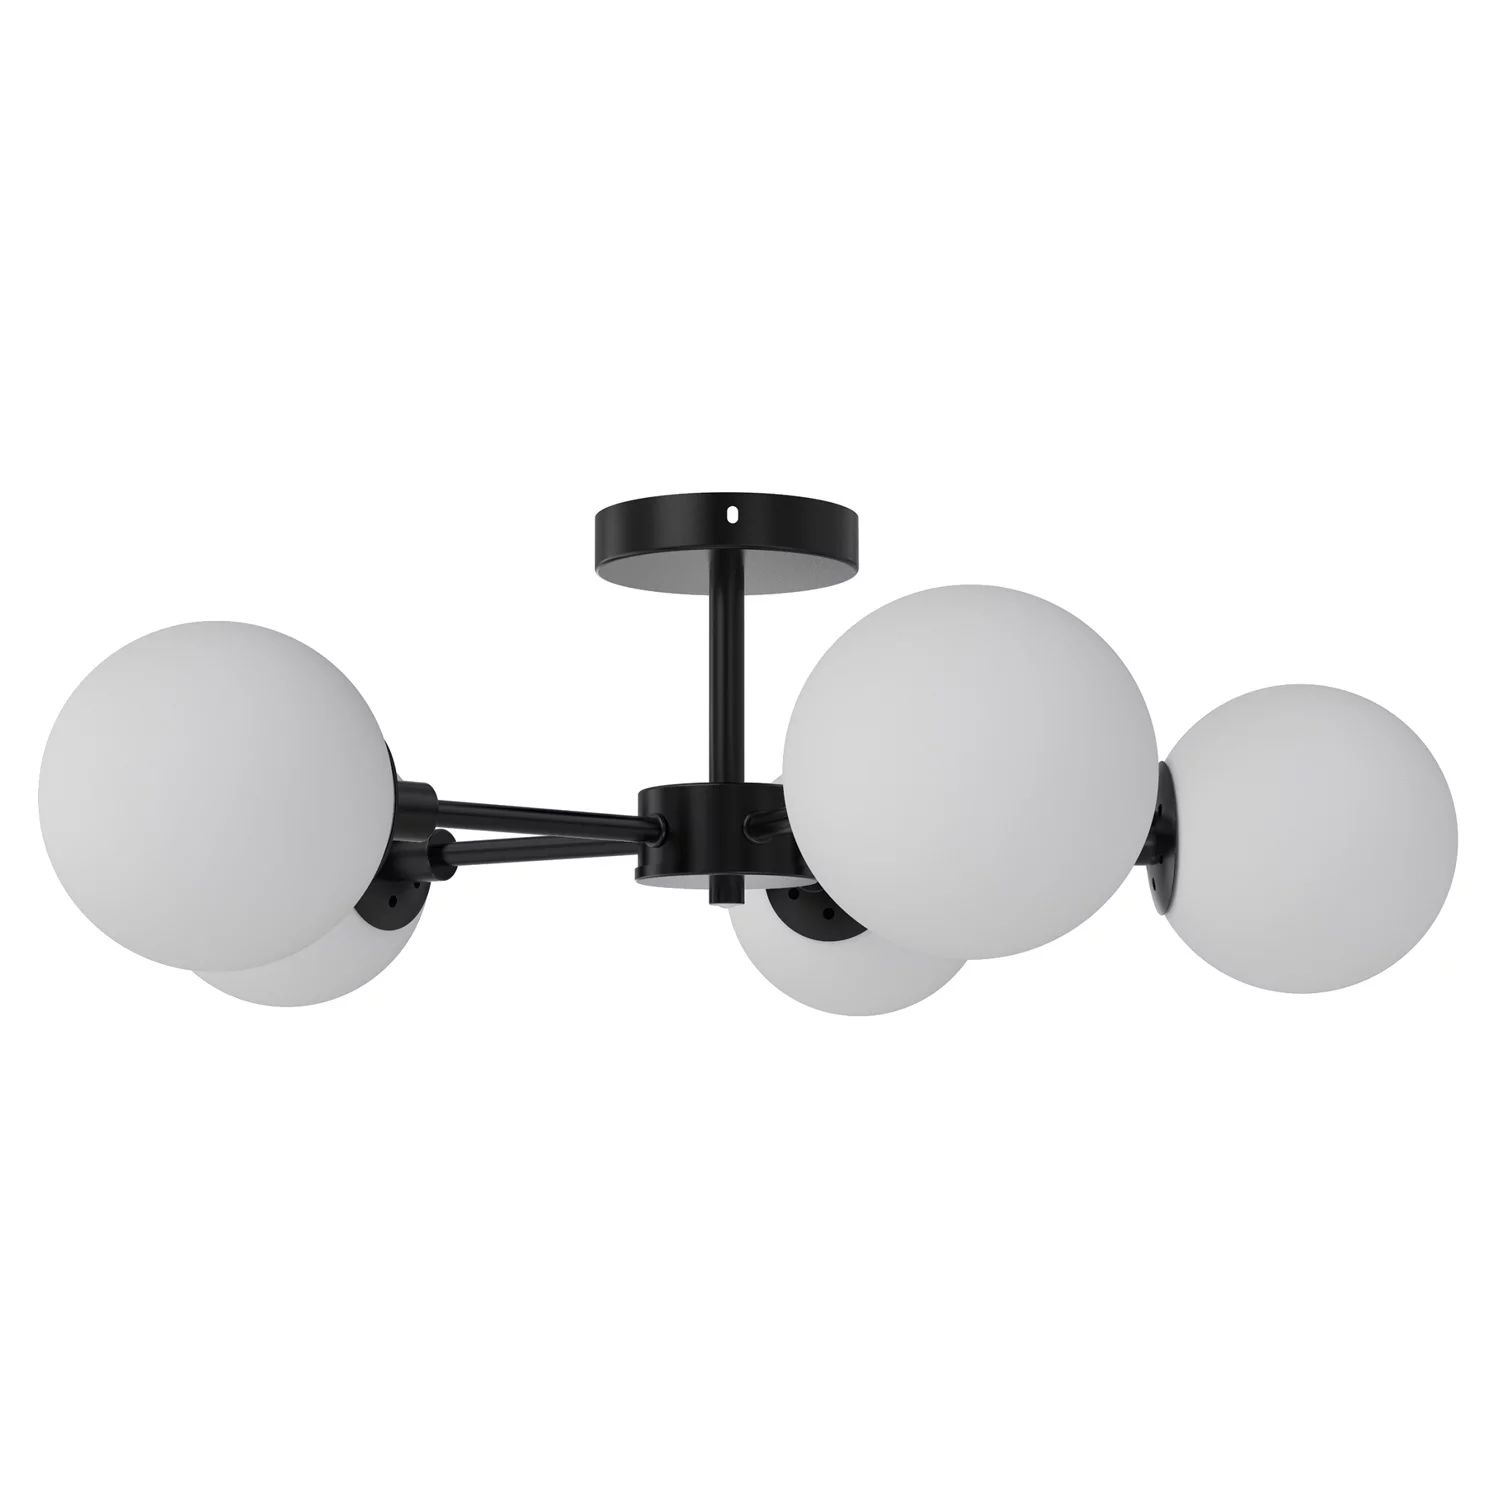 Better Homes & Gardens 26" Architectural 5-Globe Ceiling Light, Black Finish Frosted Glass Shades | Walmart (US)